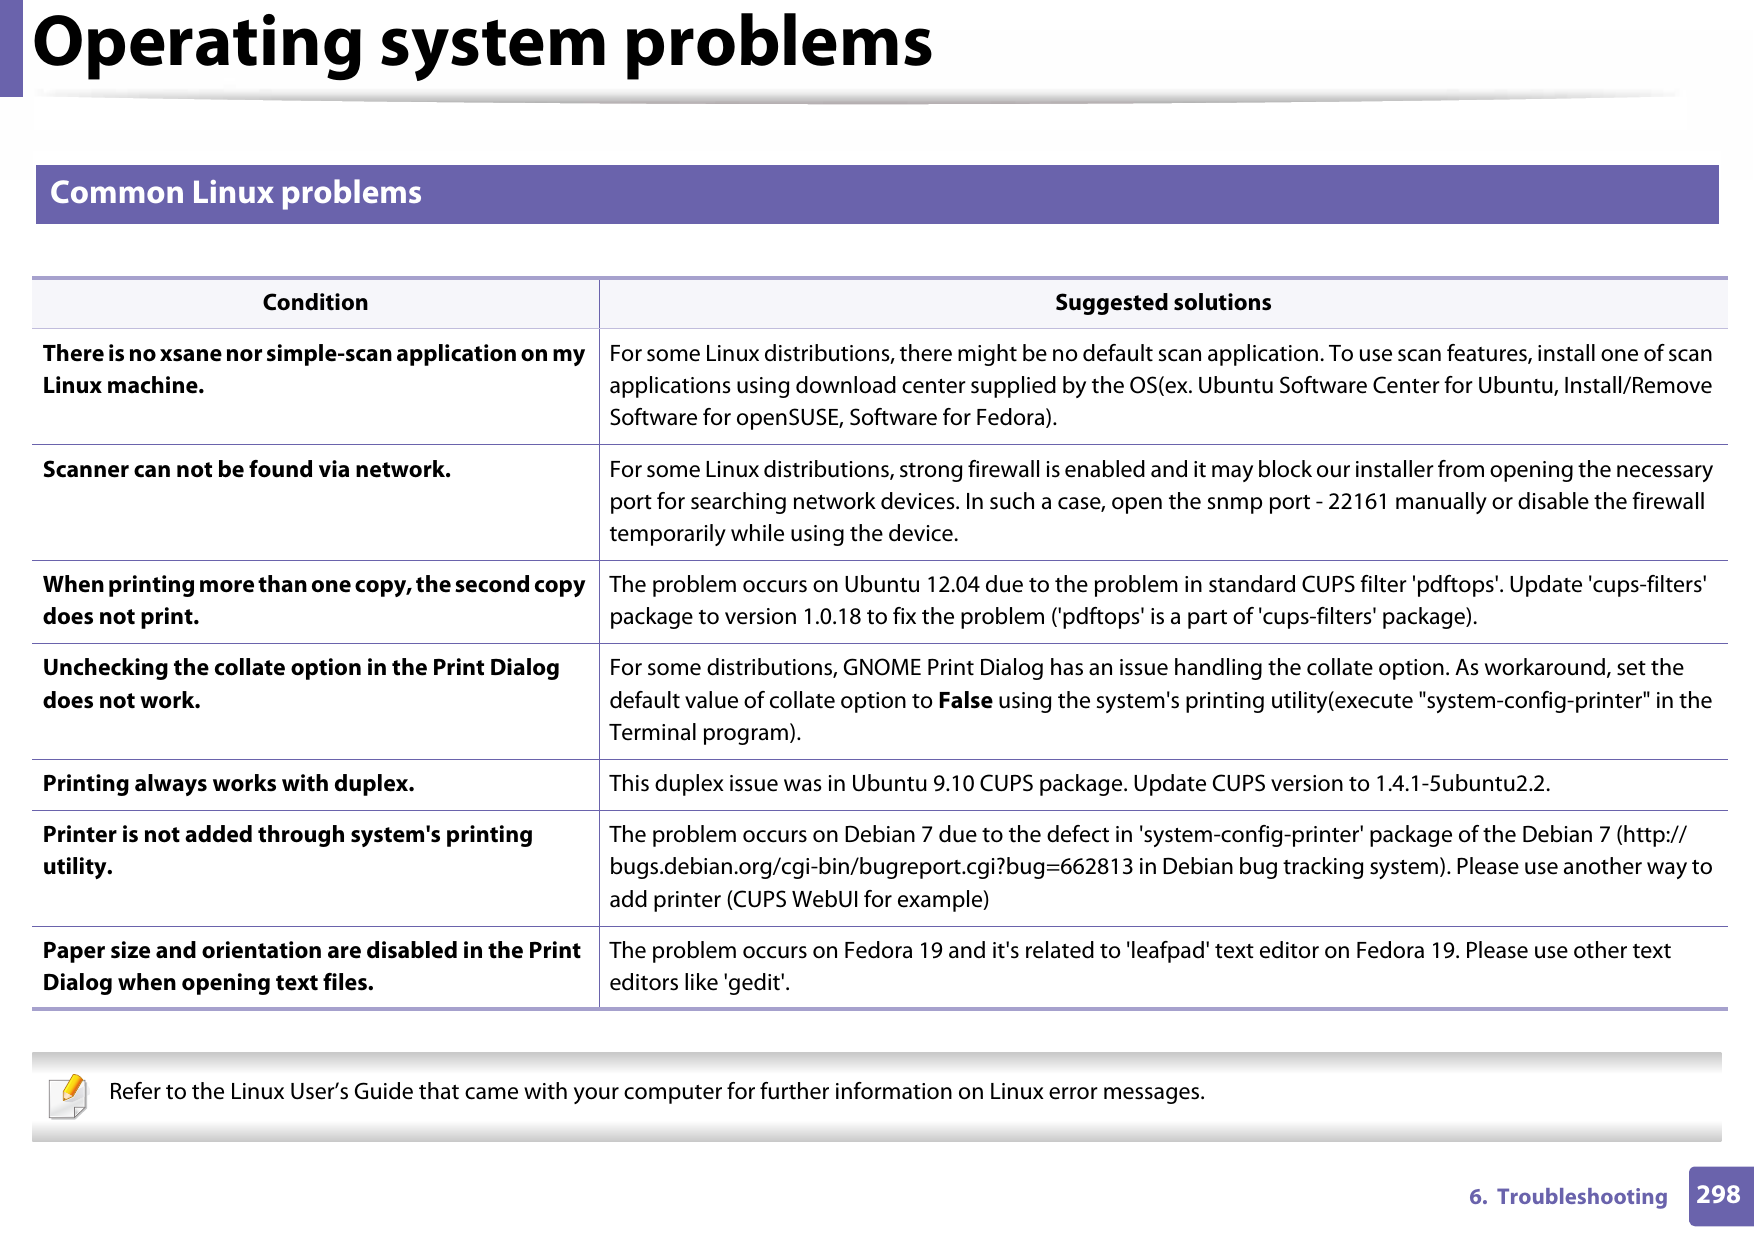 Operating system problems2986.  Troubleshooting3 Common Linux problems   Refer to the Linux User’s Guide that came with your computer for further information on Linux error messages. Condition Suggested solutionsThere is no xsane nor simple-scan application on my Linux machine.For some Linux distributions, there might be no default scan application. To use scan features, install one of scan applications using download center supplied by the OS(ex. Ubuntu Software Center for Ubuntu, Install/Remove Software for openSUSE, Software for Fedora).Scanner can not be found via network. For some Linux distributions, strong firewall is enabled and it may block our installer from opening the necessary port for searching network devices. In such a case, open the snmp port - 22161 manually or disable the firewall temporarily while using the device.When printing more than one copy, the second copy does not print. The problem occurs on Ubuntu 12.04 due to the problem in standard CUPS filter &apos;pdftops&apos;. Update &apos;cups-filters&apos; package to version 1.0.18 to fix the problem (&apos;pdftops&apos; is a part of &apos;cups-filters&apos; package).Unchecking the collate option in the Print Dialog does not work.For some distributions, GNOME Print Dialog has an issue handling the collate option. As workaround, set the default value of collate option to False using the system&apos;s printing utility(execute &quot;system-config-printer&quot; in the Terminal program).Printing always works with duplex. This duplex issue was in Ubuntu 9.10 CUPS package. Update CUPS version to 1.4.1-5ubuntu2.2.Printer is not added through system&apos;s printing utility.The problem occurs on Debian 7 due to the defect in &apos;system-config-printer&apos; package of the Debian 7 (http://bugs.debian.org/cgi-bin/bugreport.cgi?bug=662813 in Debian bug tracking system). Please use another way to add printer (CUPS WebUI for example)Paper size and orientation are disabled in the Print Dialog when opening text files.The problem occurs on Fedora 19 and it&apos;s related to &apos;leafpad&apos; text editor on Fedora 19. Please use other text editors like &apos;gedit&apos;.